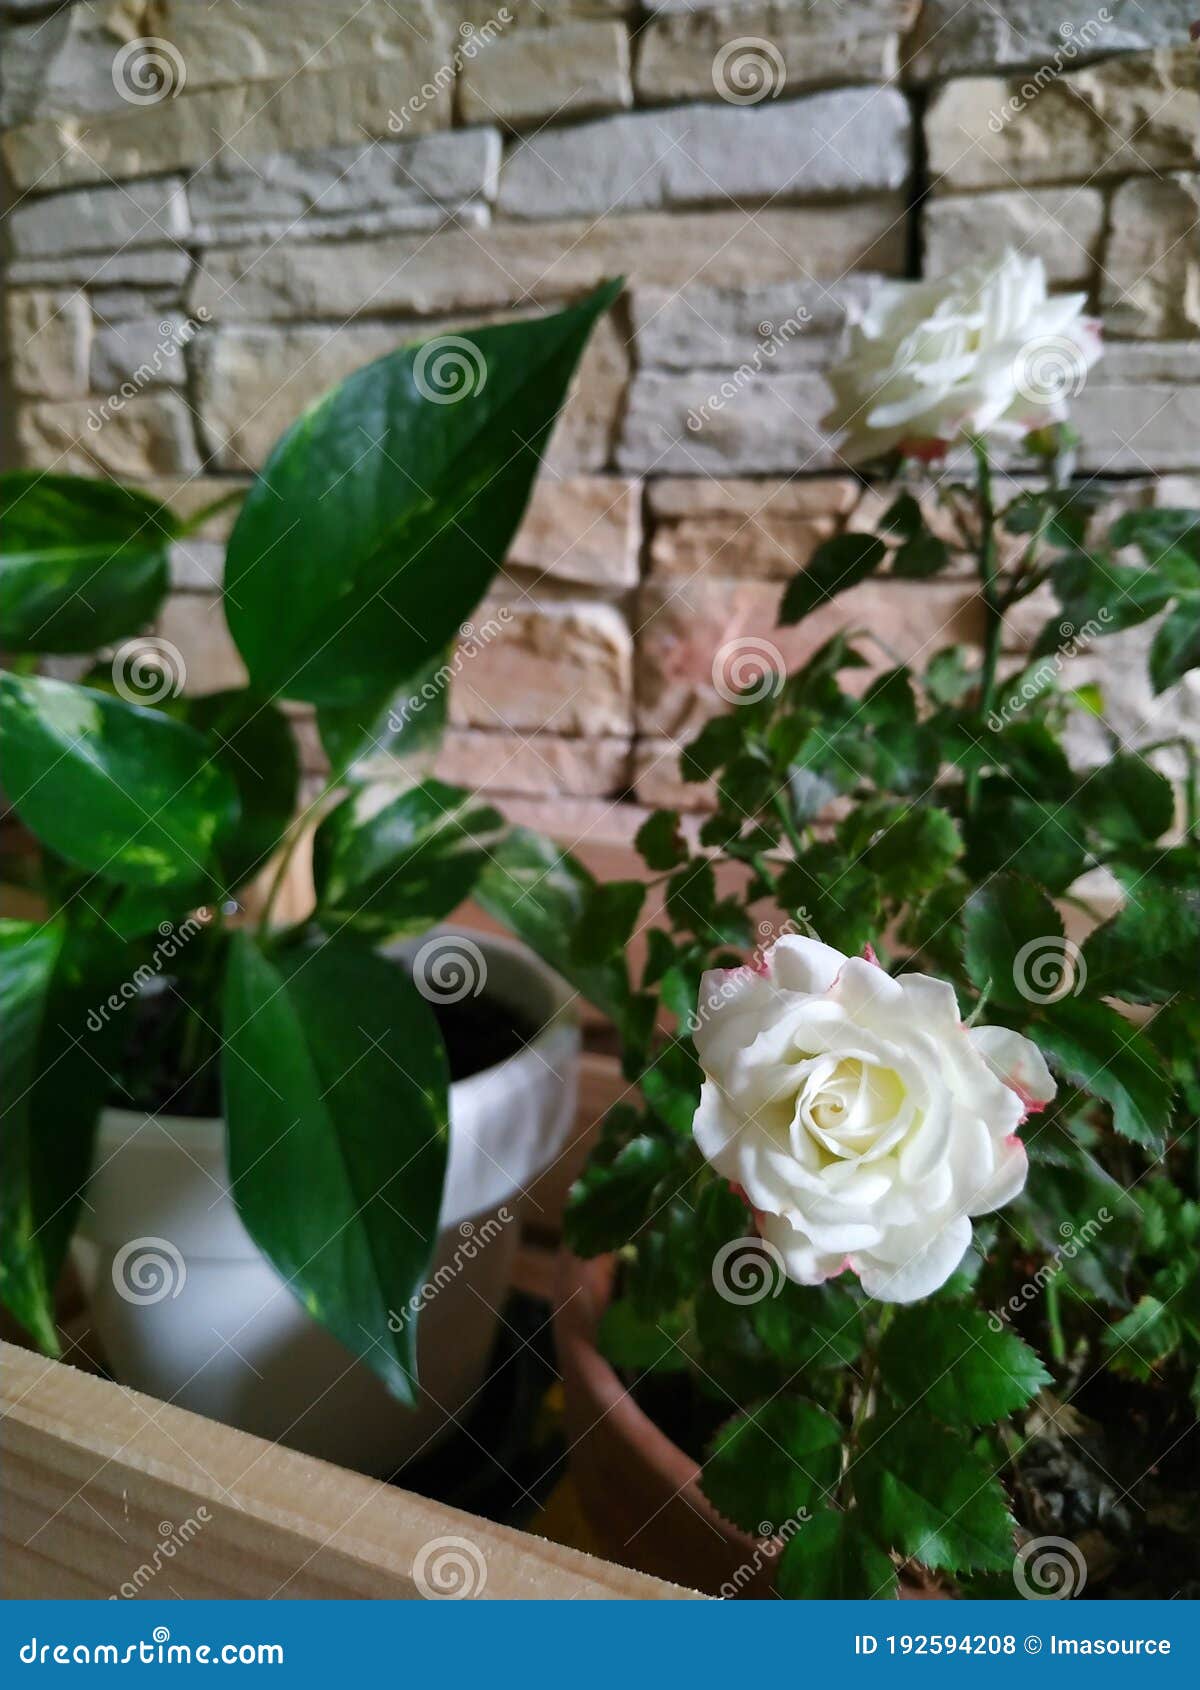 home garden. flowerpots with white roses and potus plant.